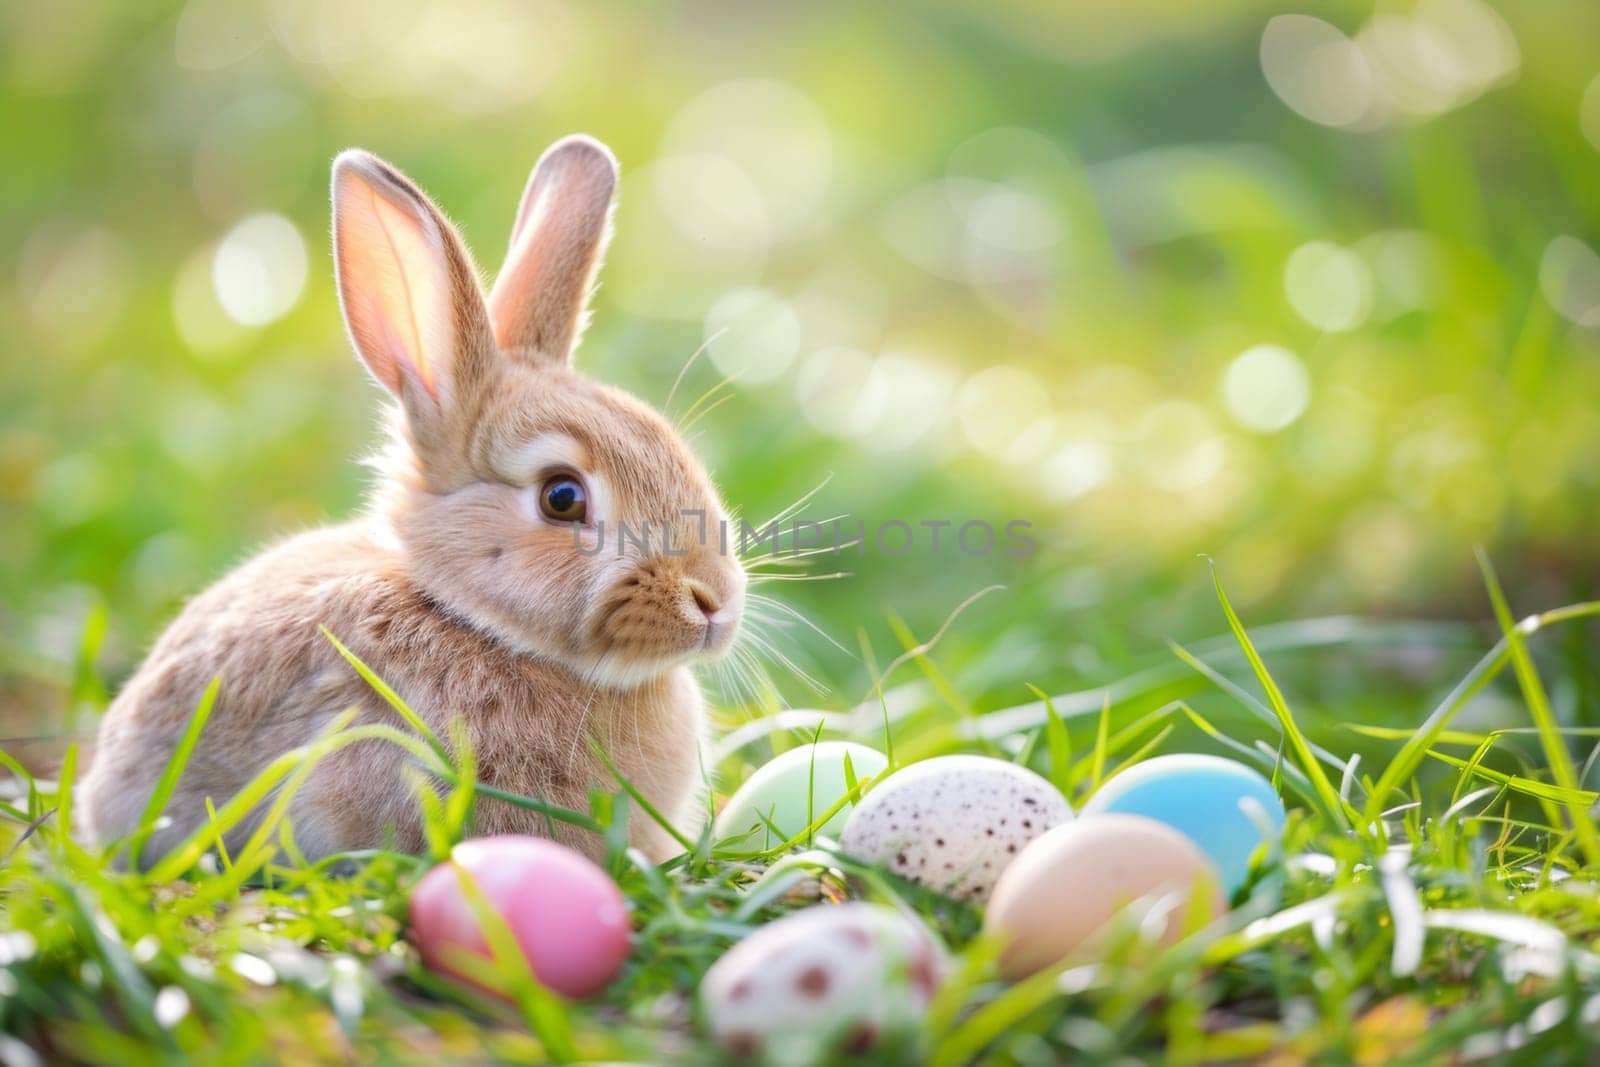 A rabbit is sitting in a field of grass with a bunch of eggs around it. The scene is peaceful and serene, with the rabbit looking up at the camera